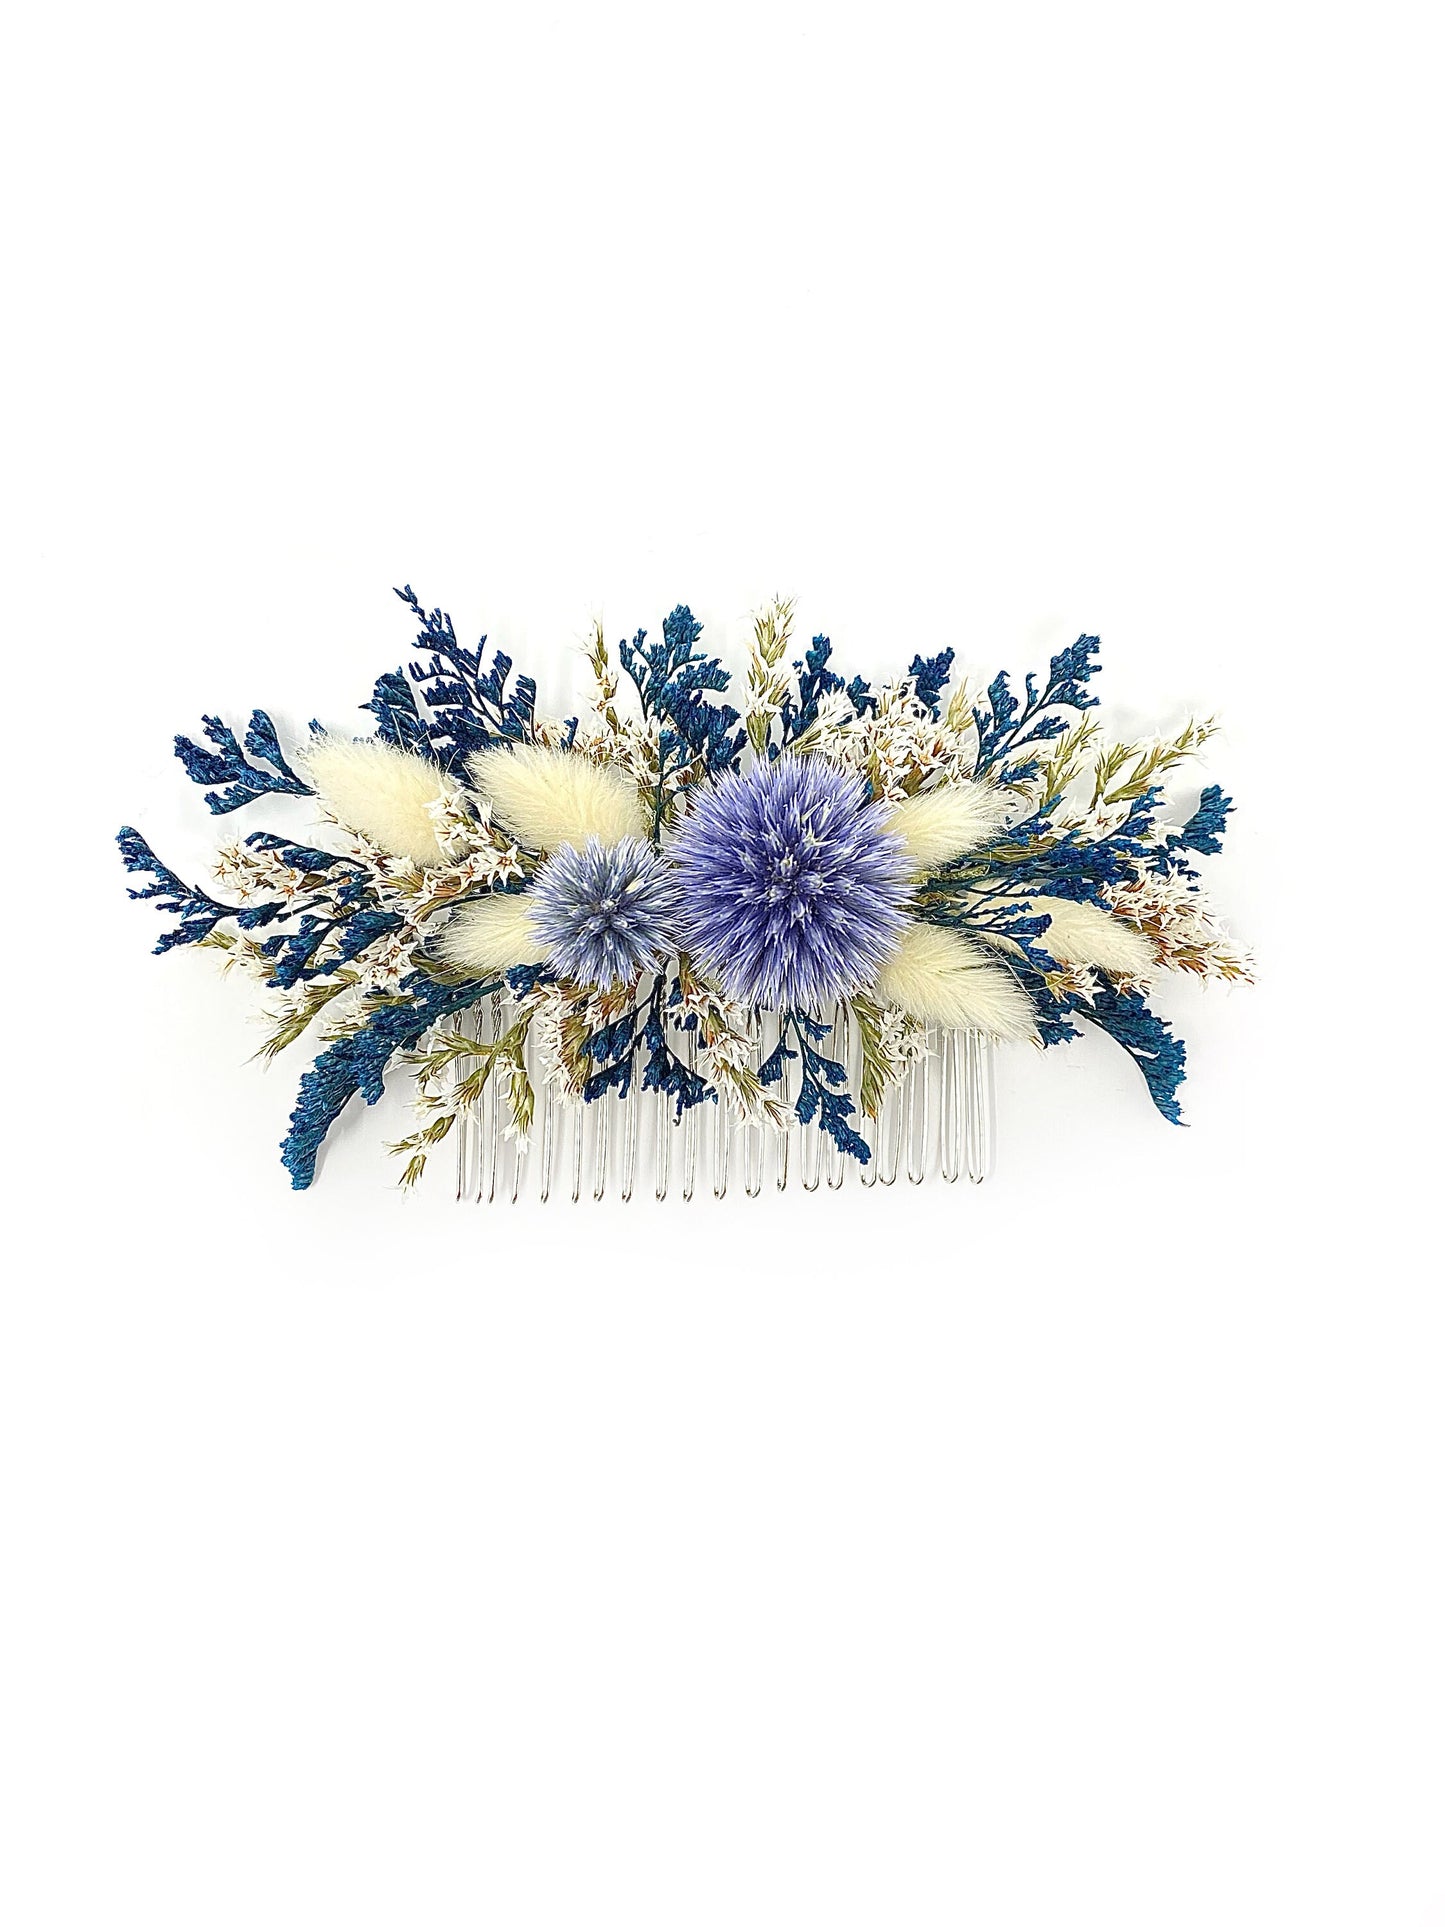 Clear Skies Collection, Wedding Bouquet, Dried Flowers, Winter, Preserved, Bridal, Globe Thistle, Bunny Tails, White, Ribbon, German Statice, Caspia, Blue, Dried